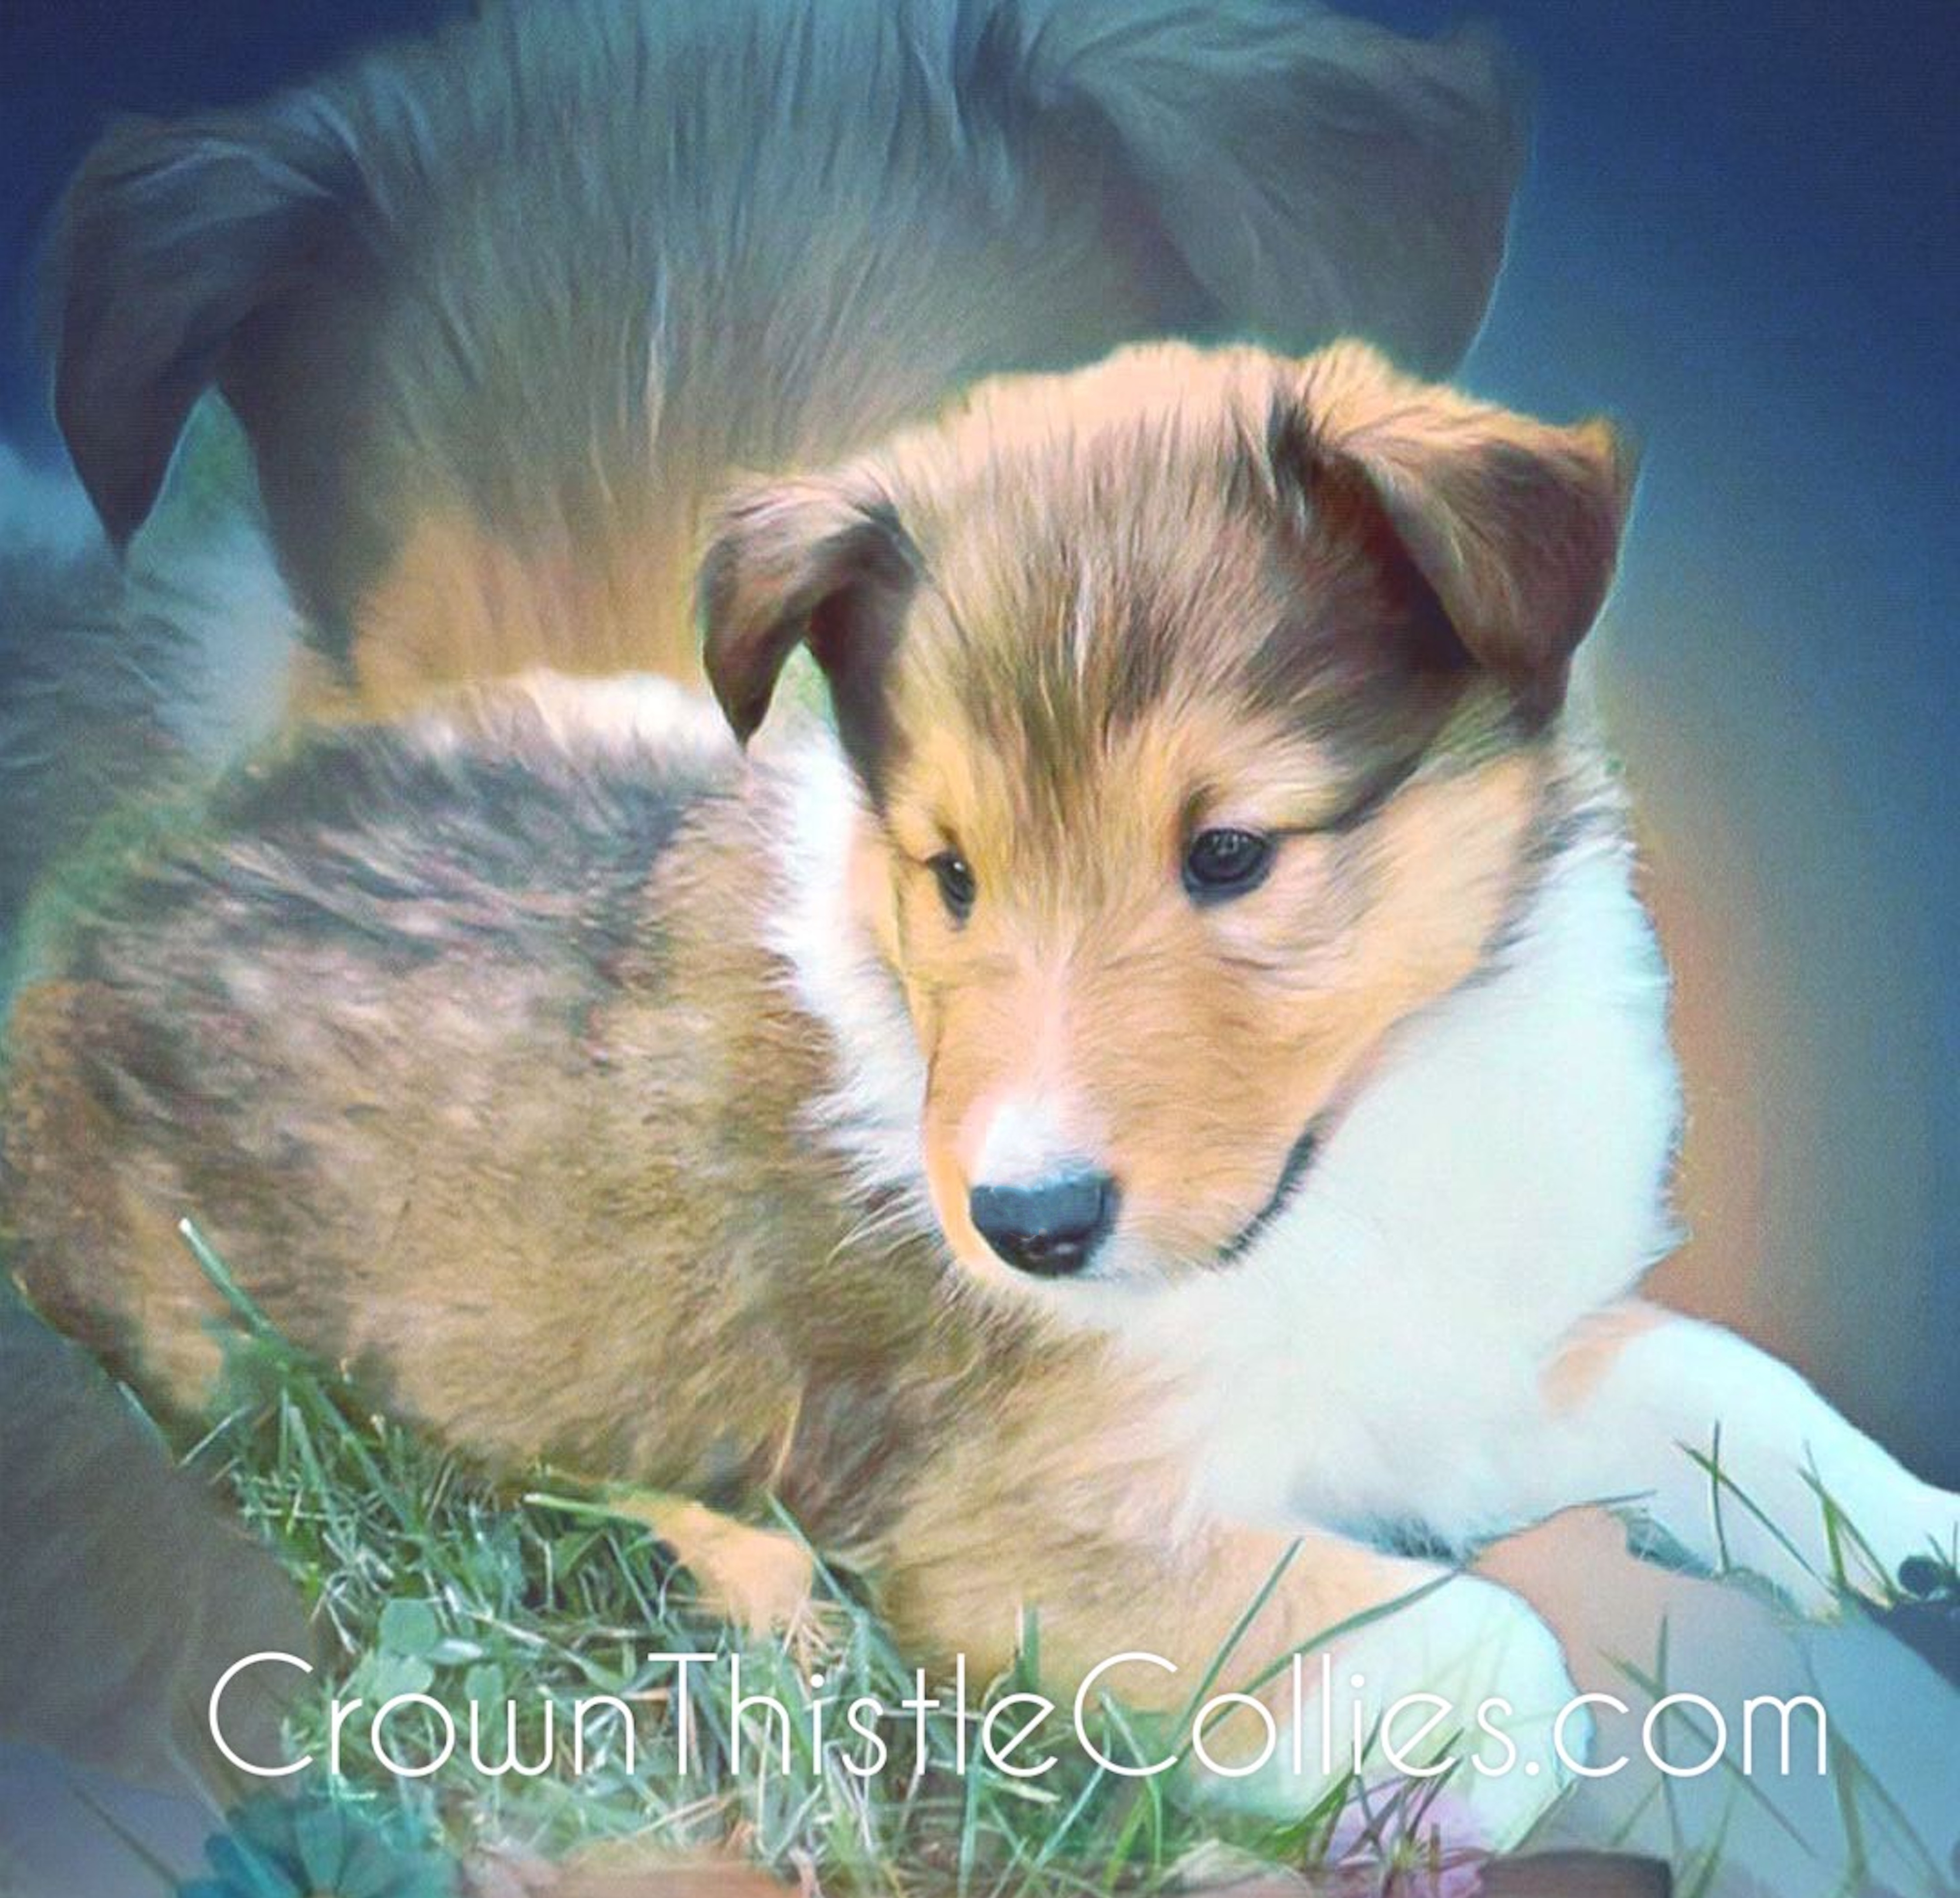 A Crown Thistle Collies rough collie pup in Michigan